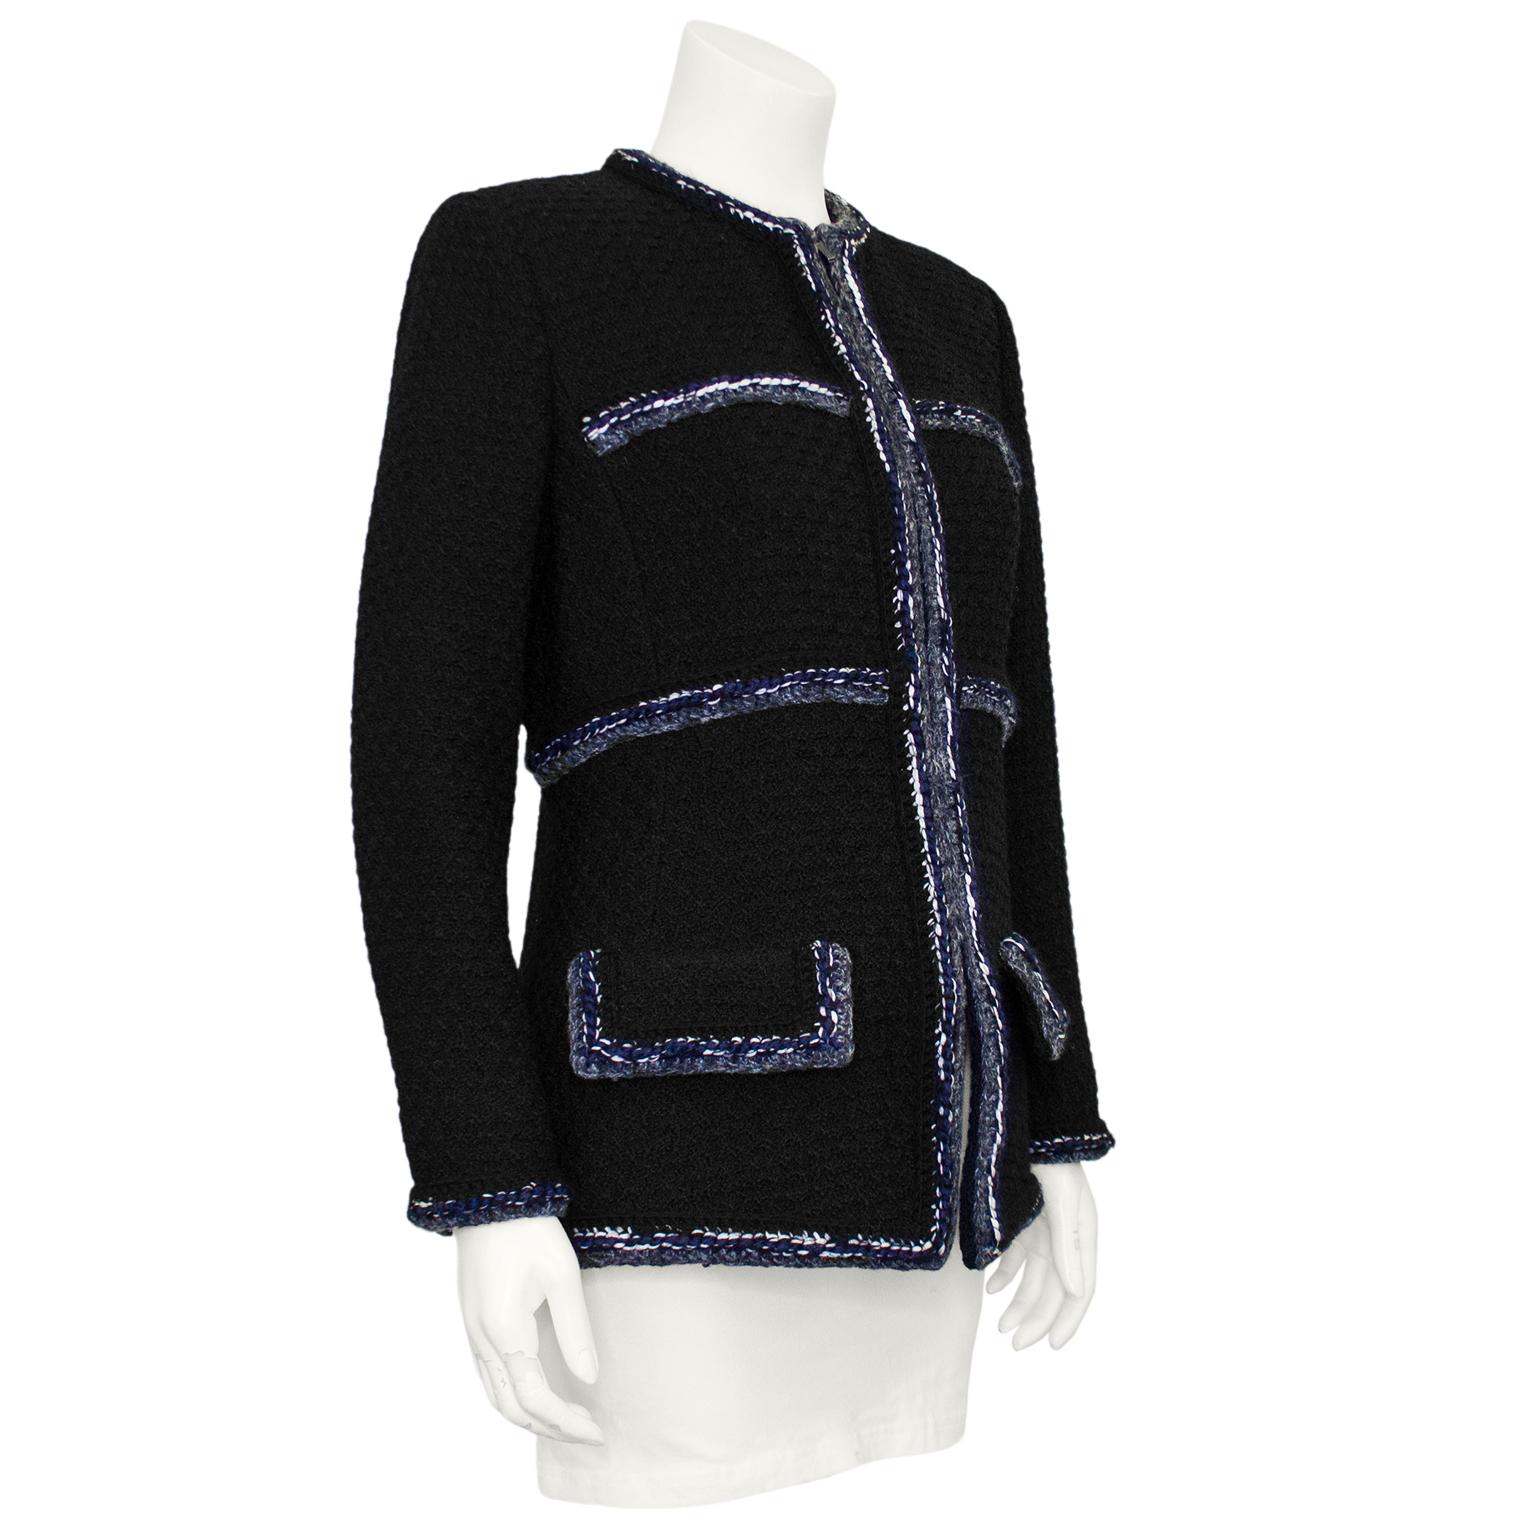 Amazing Chanel black boucle jacket from the 2010 era. The jacket features grey, navy and white boucle trim along the collarless neckline, front placket, pockets, cuffs and waist detail. The jacket zips up the front with a gunmetal tone zipper that